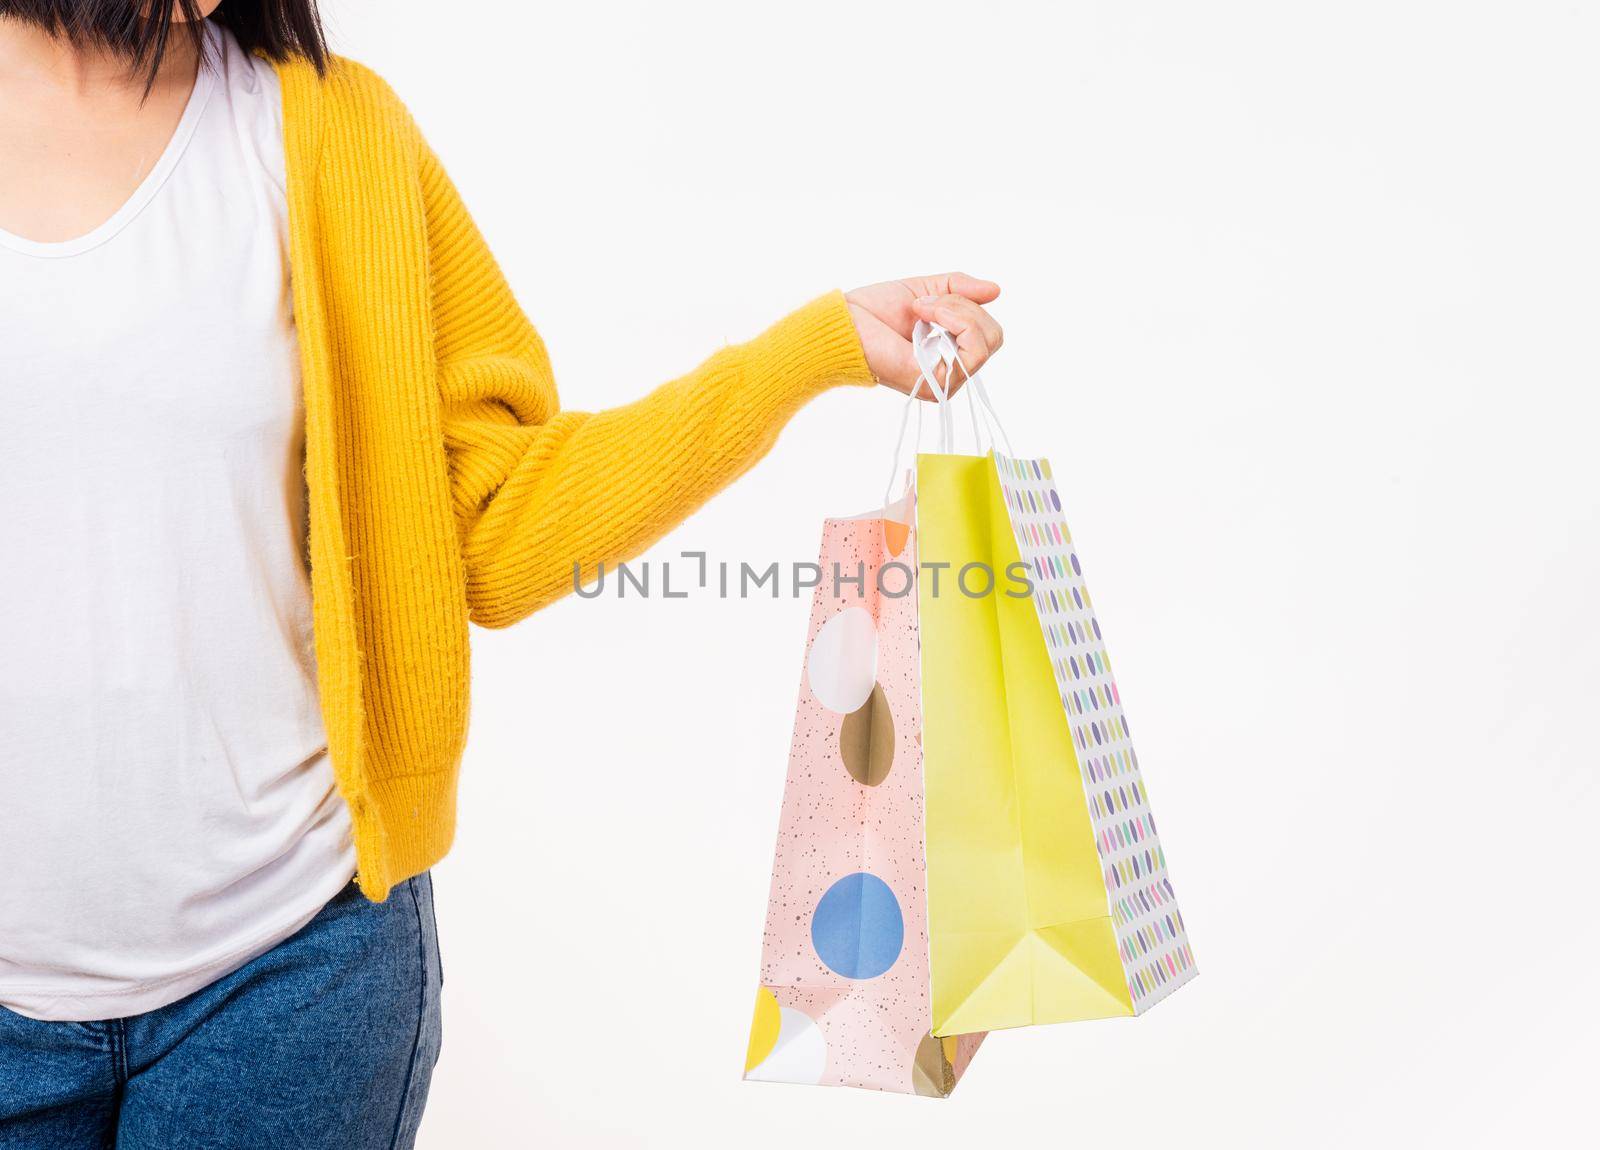 Happy young female hold many packets within arms, woman hand she wears a yellow shirt holding shopping bags multicolor isolated on white background, Black Friday sale concept